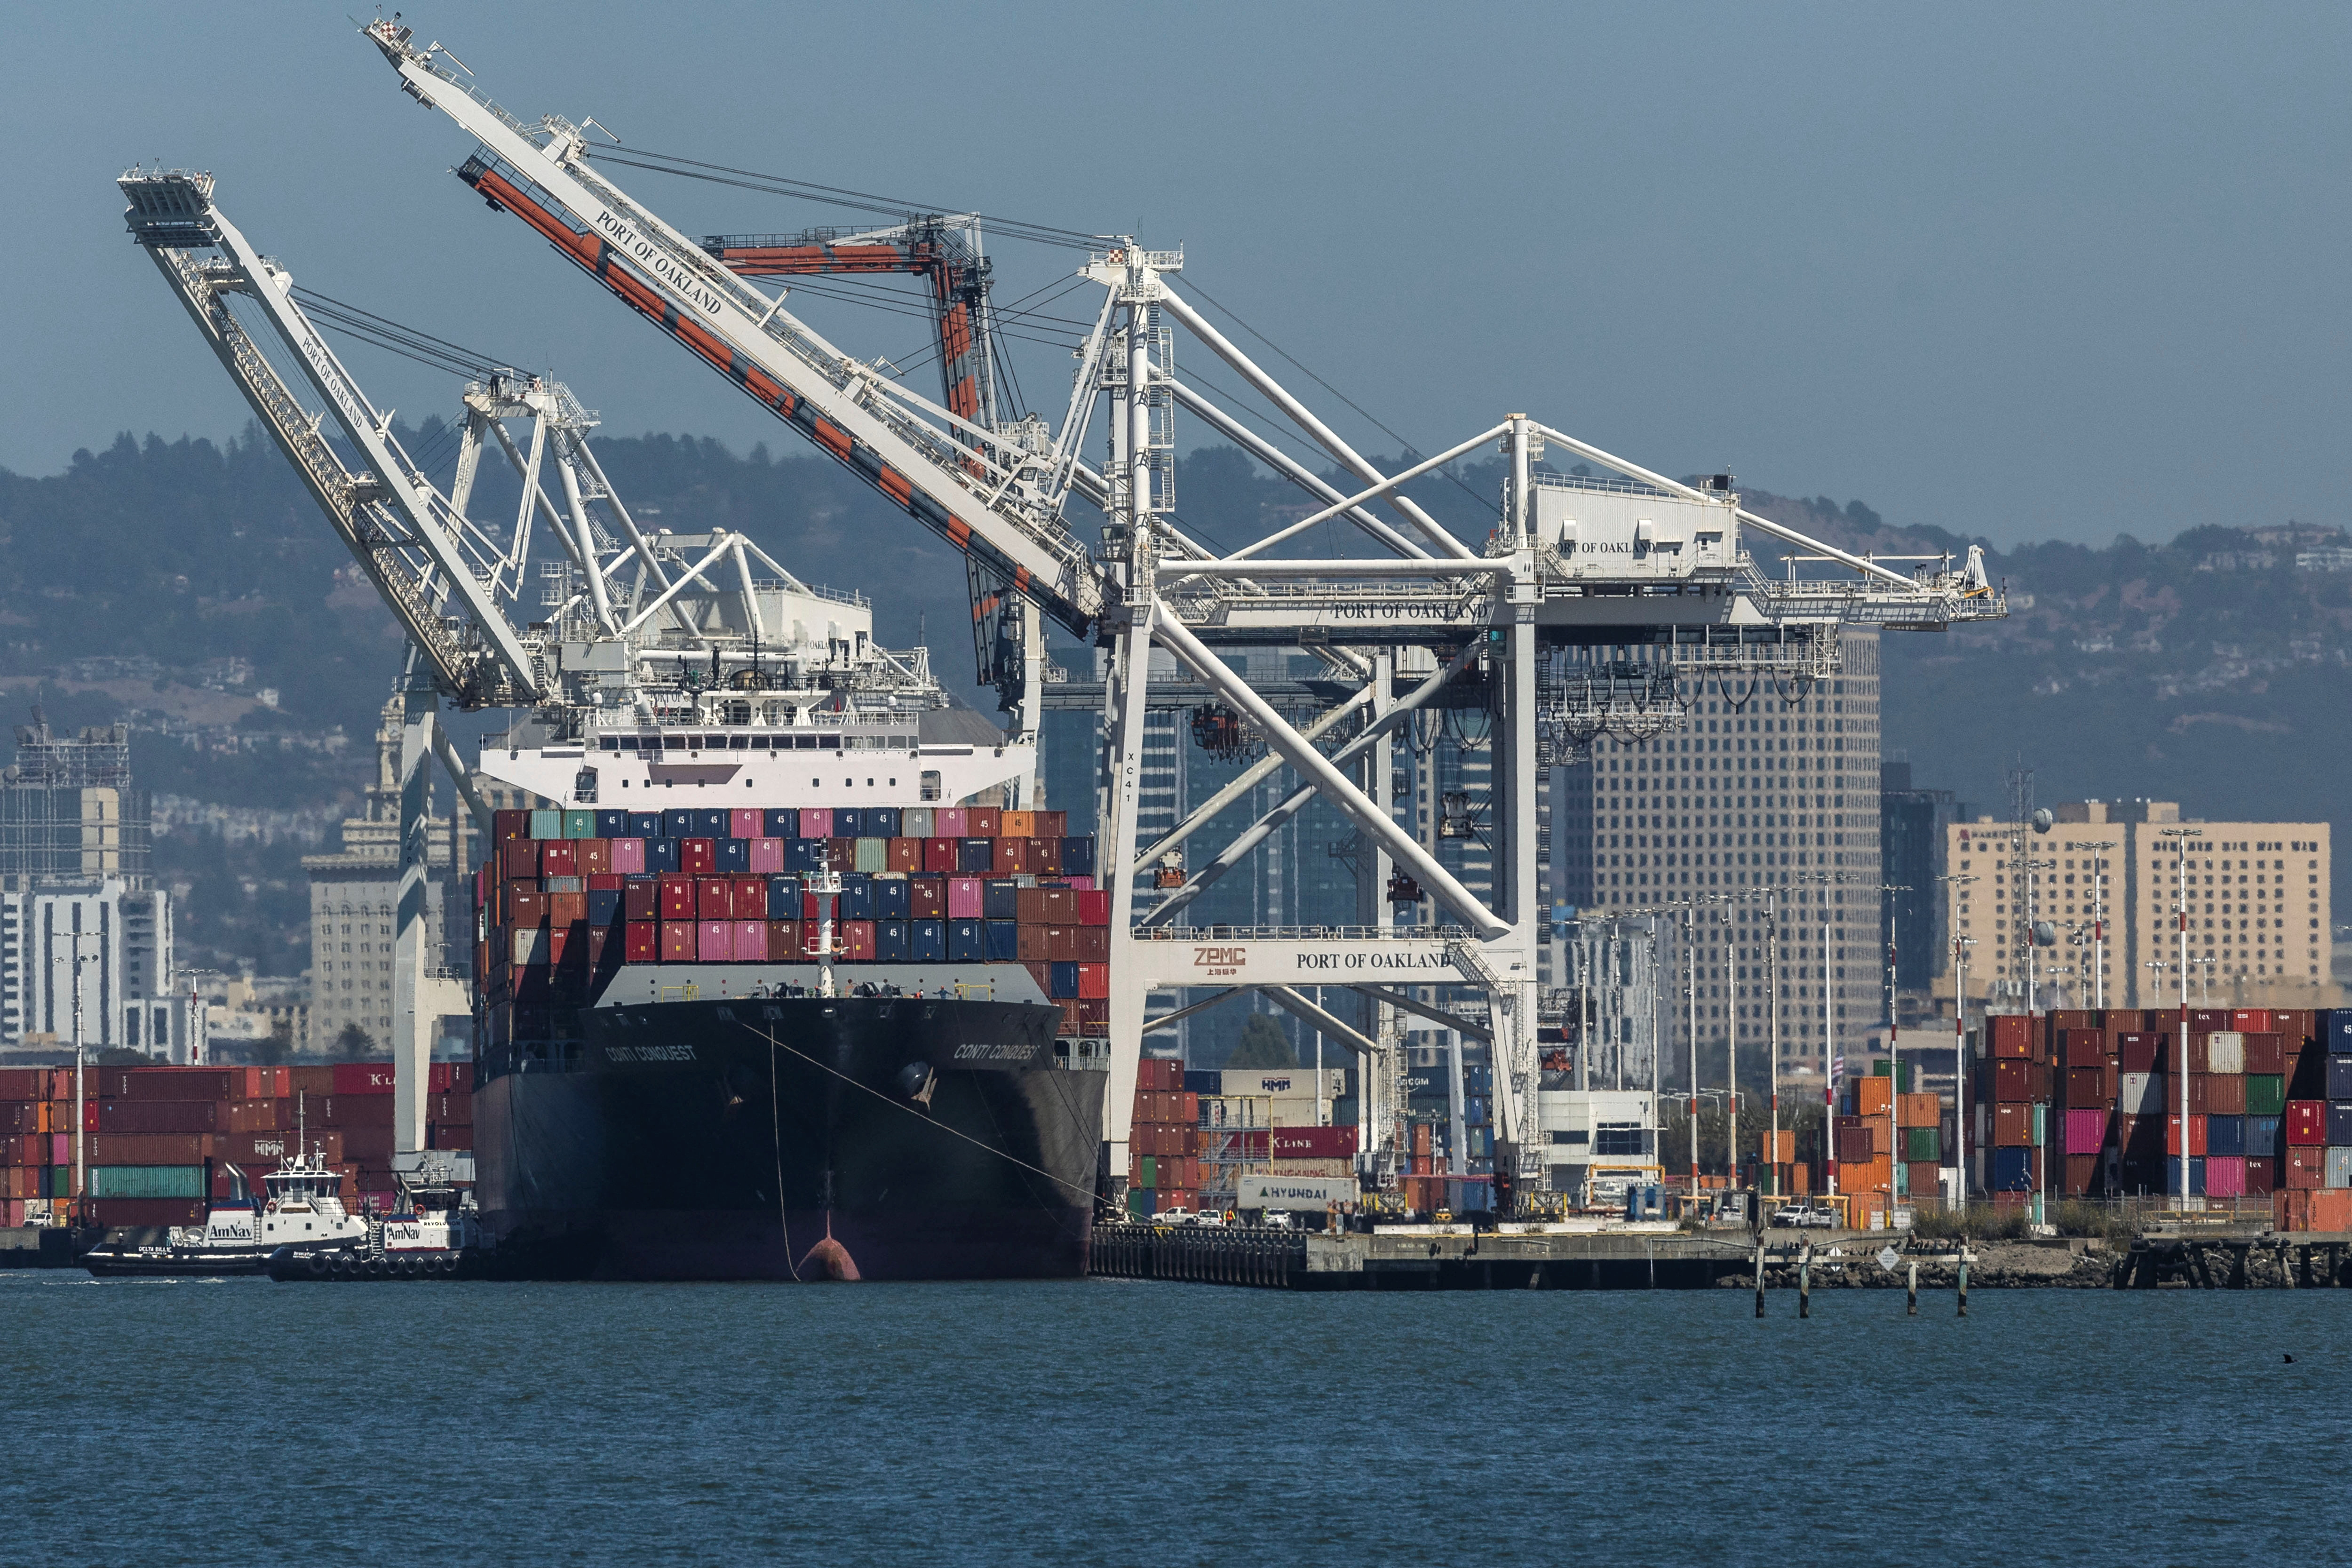 A cargo ship is seen at the port of Oakland, California